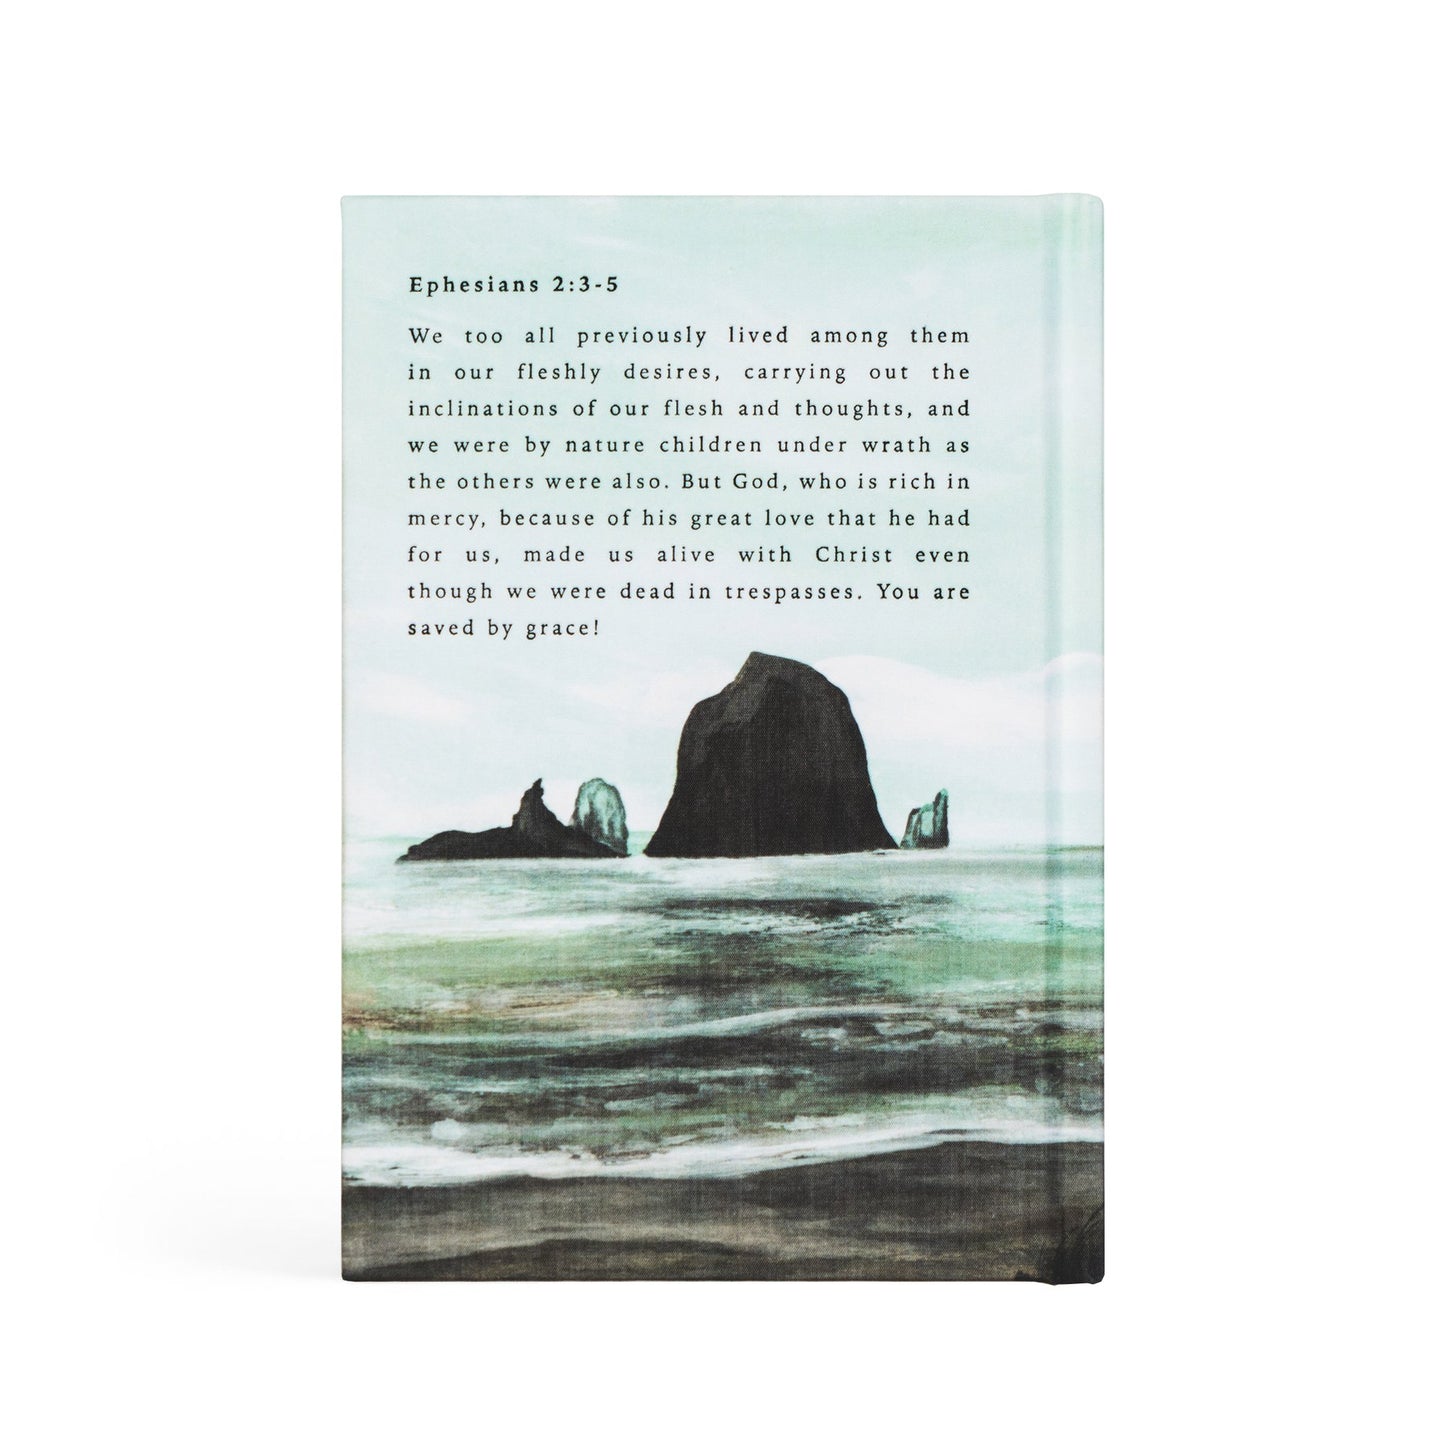 Lined Notebook: Cannon Beach